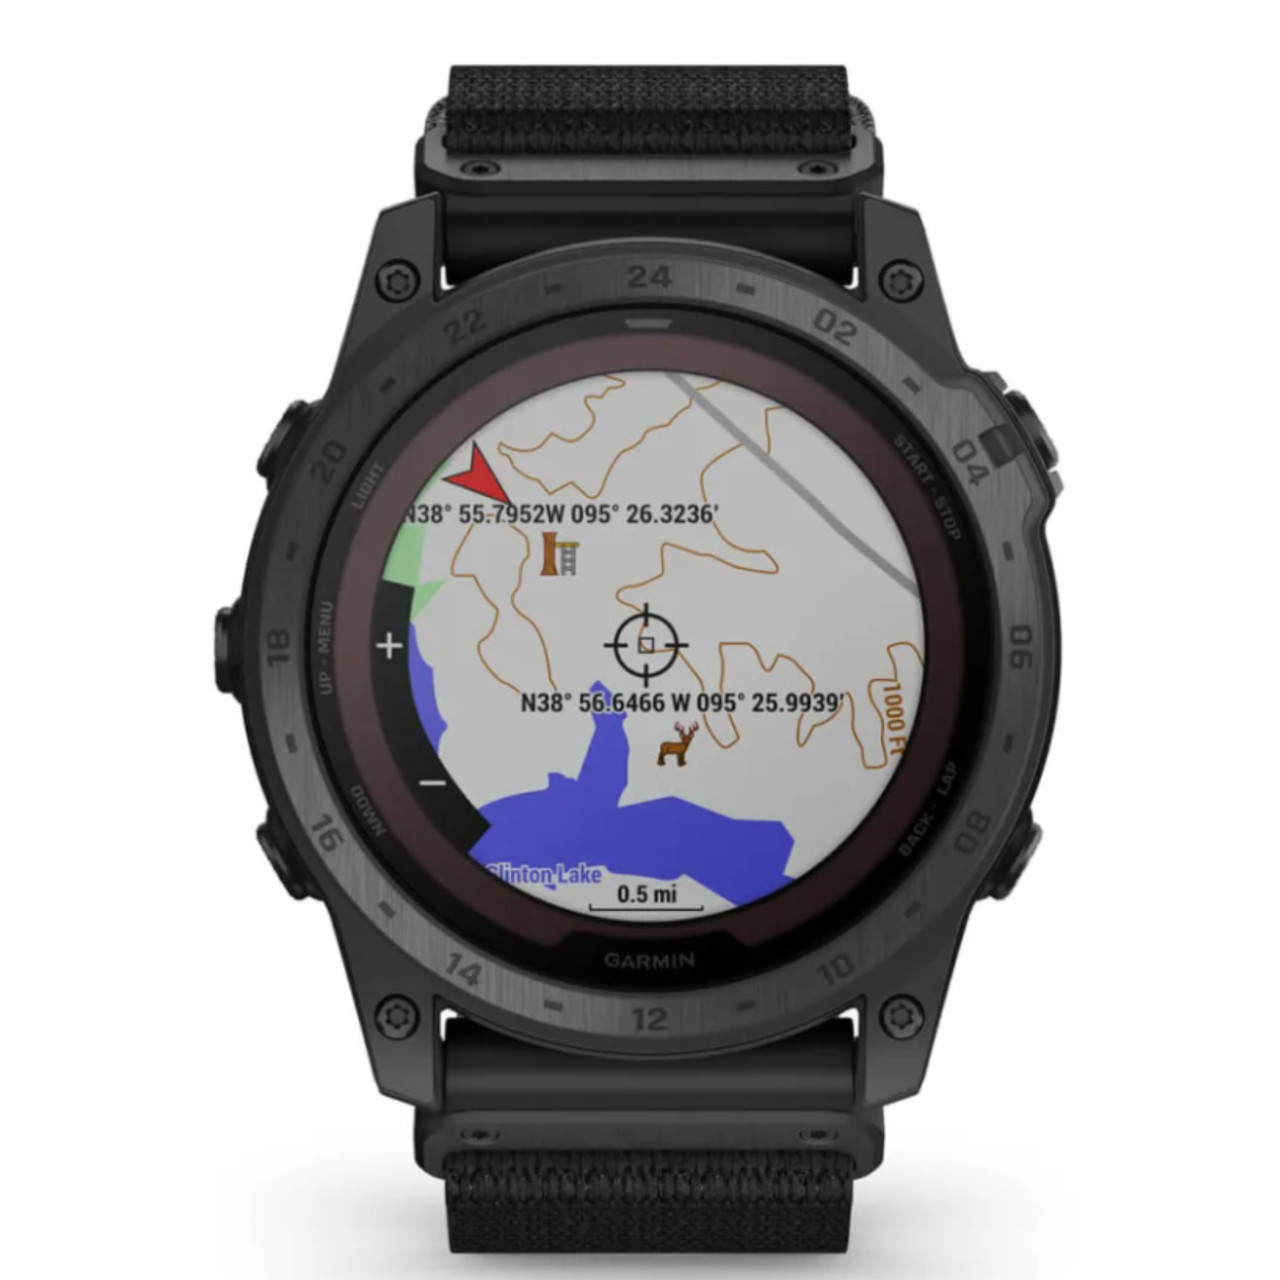 Garmin New OEM tactix® 7 – Pro Edition Solar Powered Tactical GPS Watch with Nylon Band, 010-02704-10